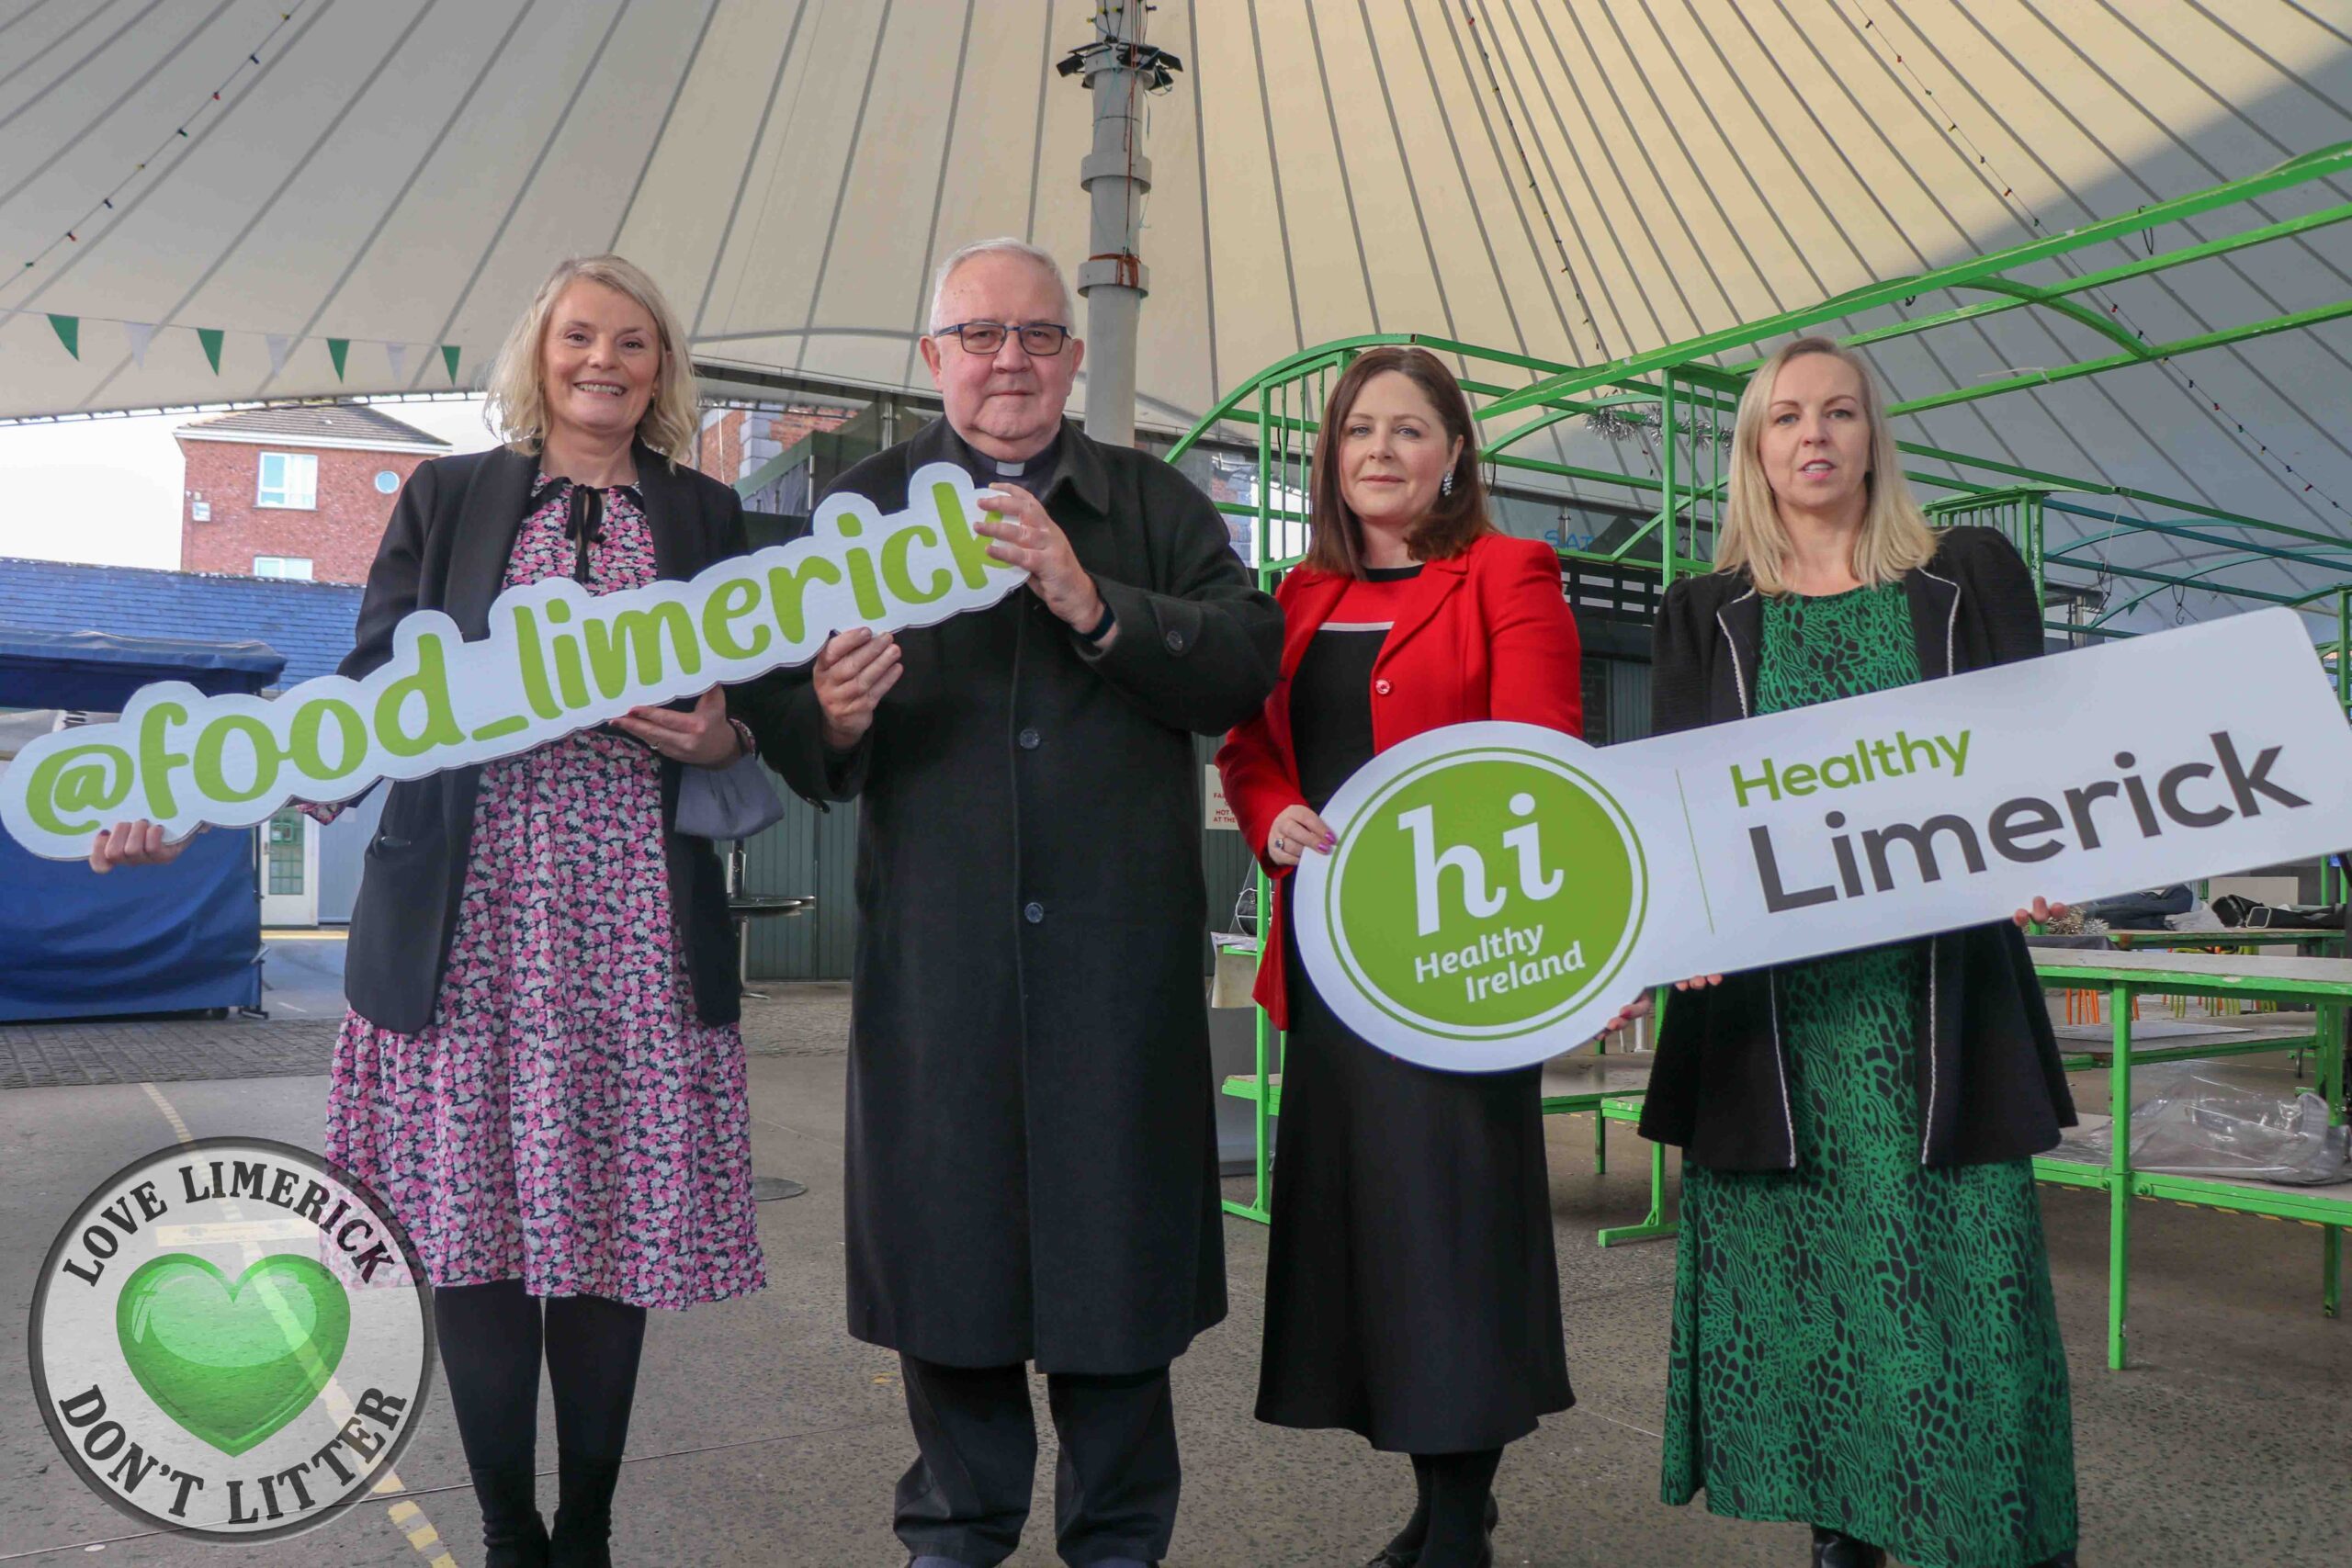 Limerick Food Partnership fakeaway classes Pictured at the Limerick Milk Market are Olivia O'Brien, LFP Coordinator,  Fr Seamus Enright, Co Chair of LFP and Redemptorists, Professor Niamh Hourigan, Vice President of Academic Affairs in Mary I and Co Chair of Limerick Food Partnership and Roisin Ross, Healthy Limerick. Picture: Richard Lynch/ilovelimerick